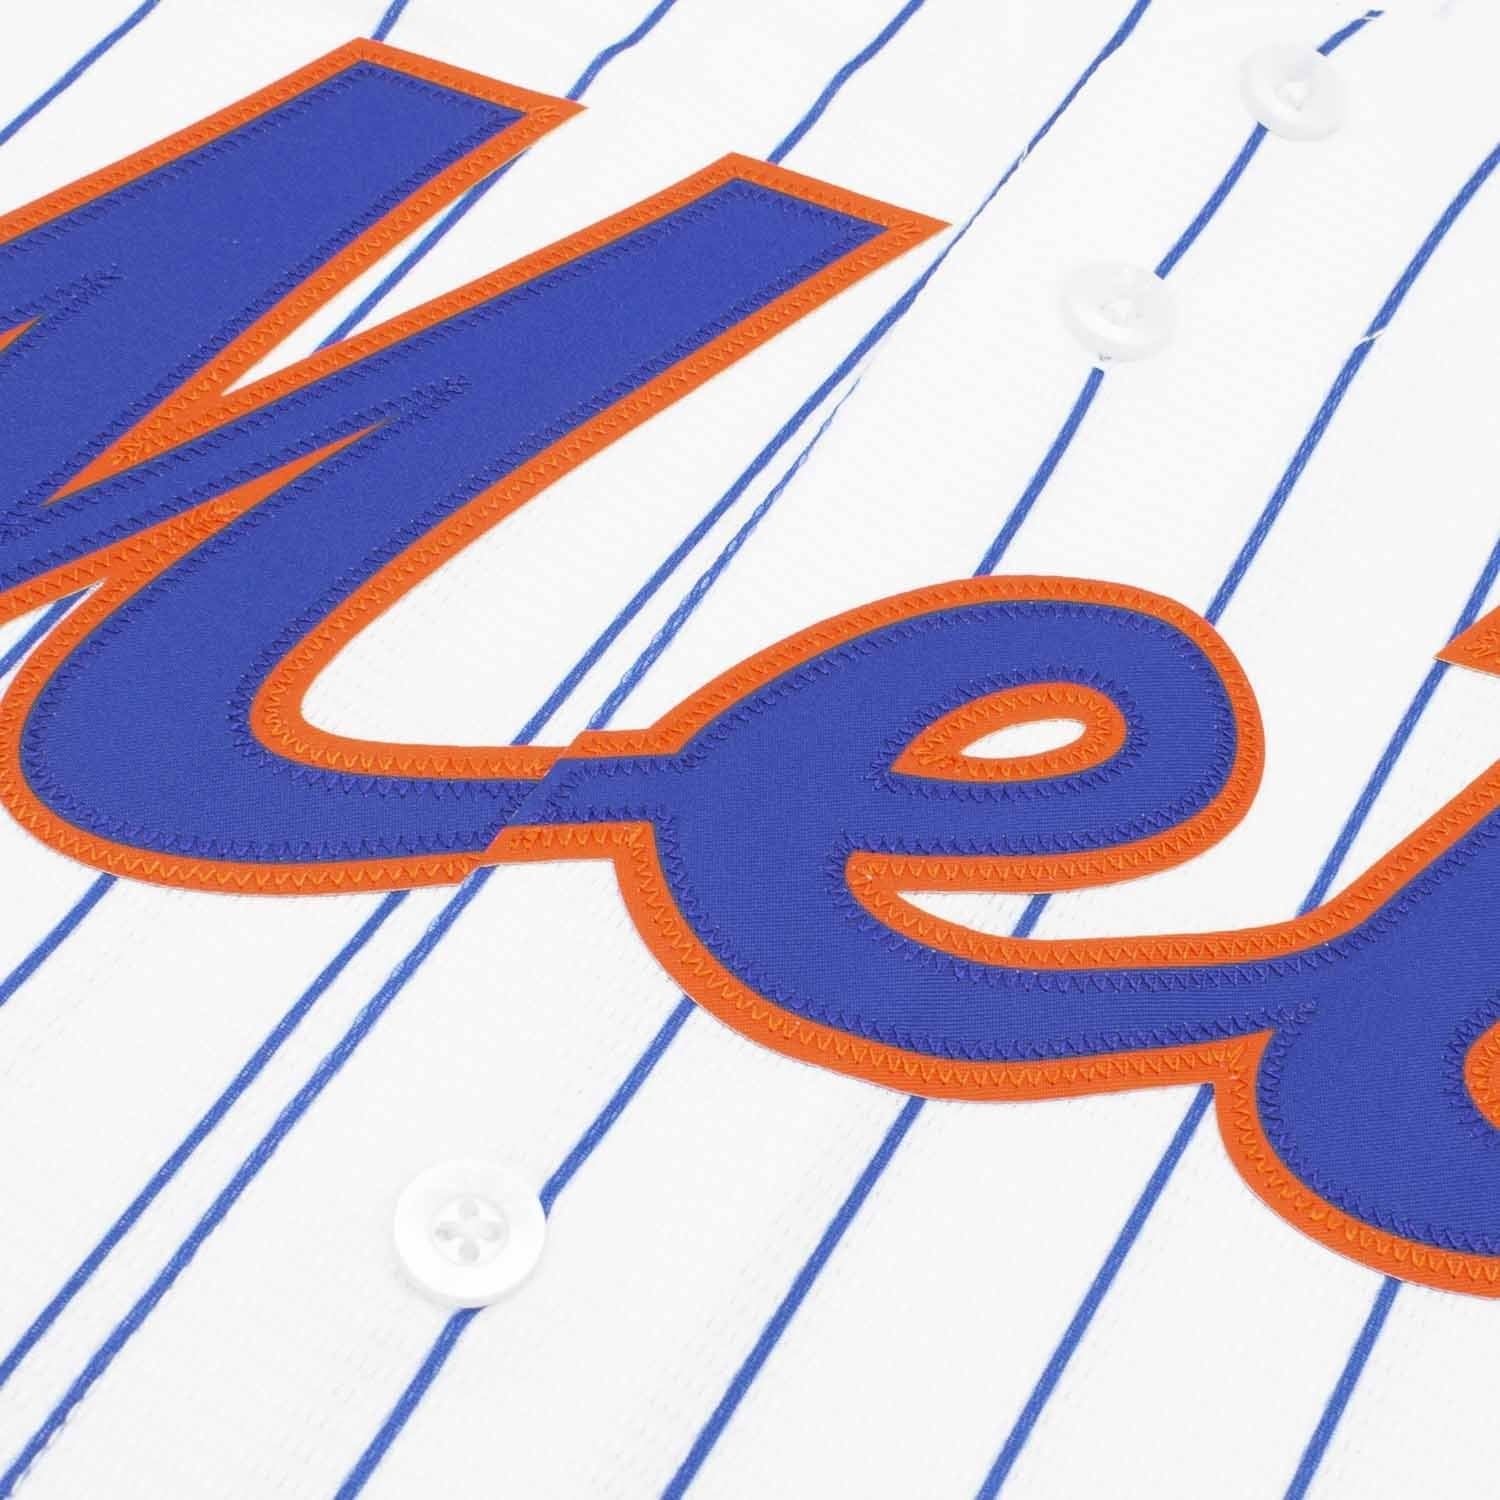 New York Mets Official MLB Replica Home Jersey White Nike